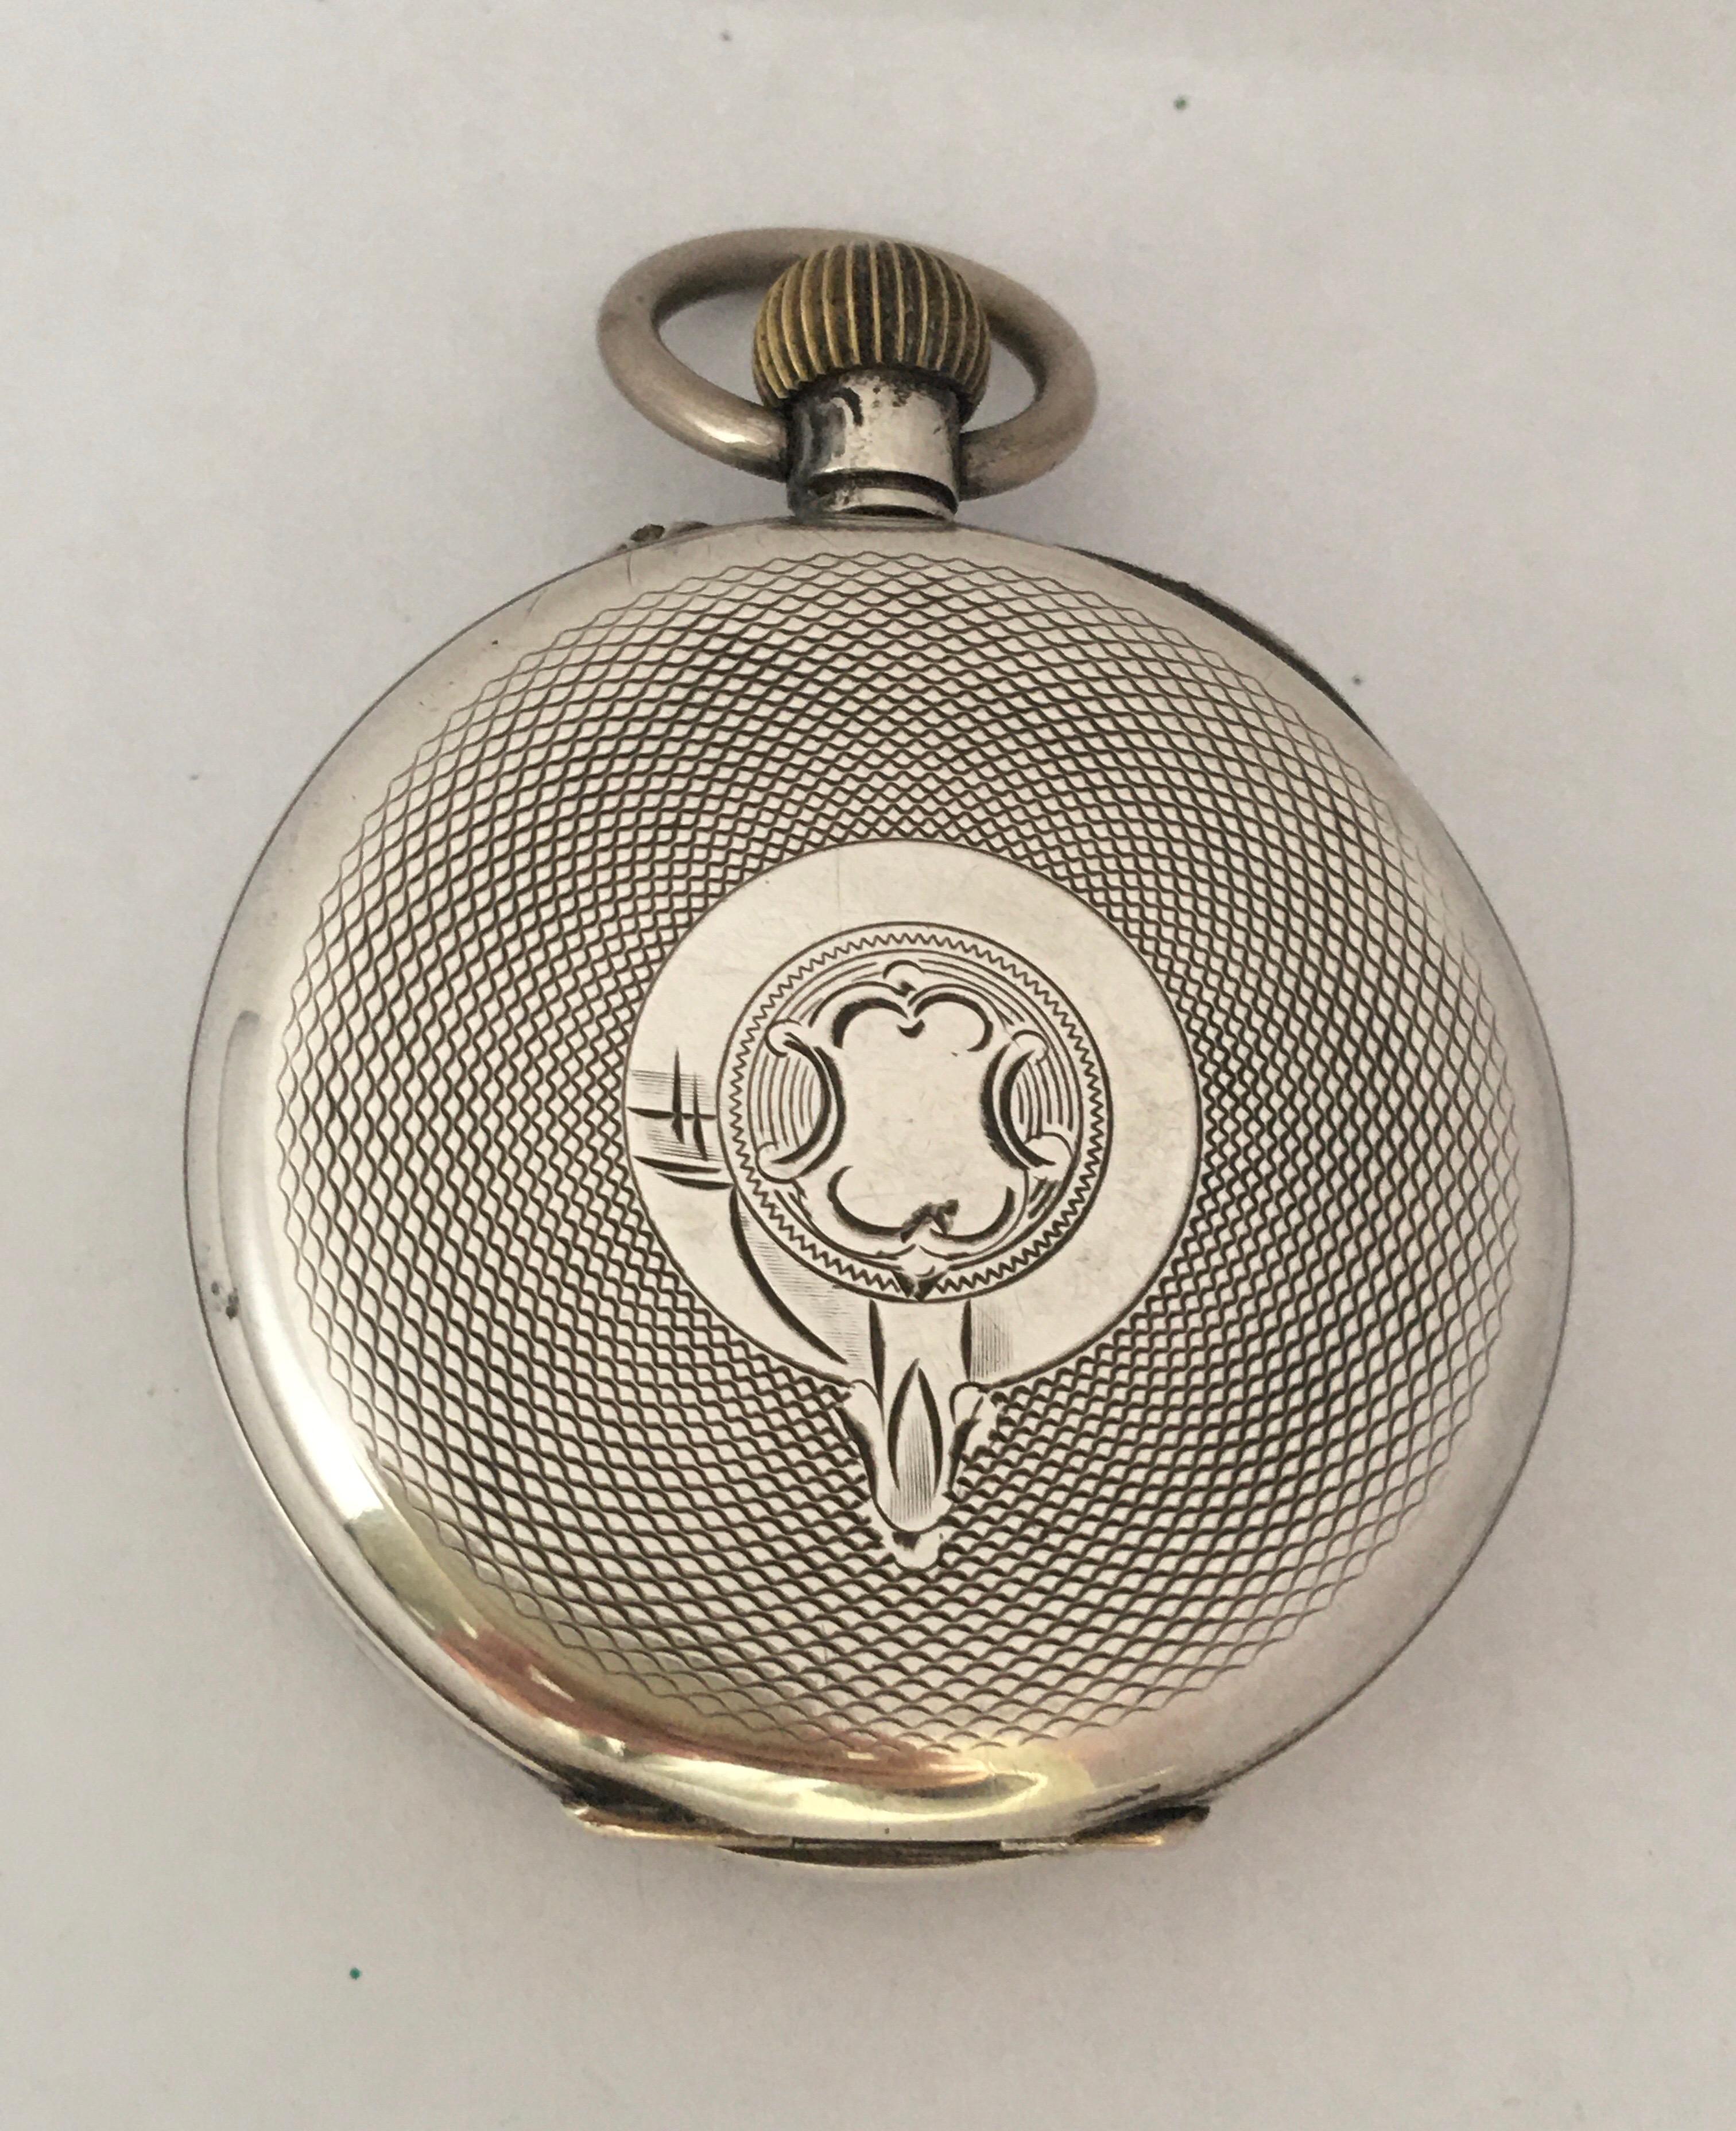 This beautiful antique hand winding silver pocket watch is in good working condition and it is ticking well. It is a pin set time setting. Visible signs of ageing and wear with small light scratches on the glass and on the silver watch case. small